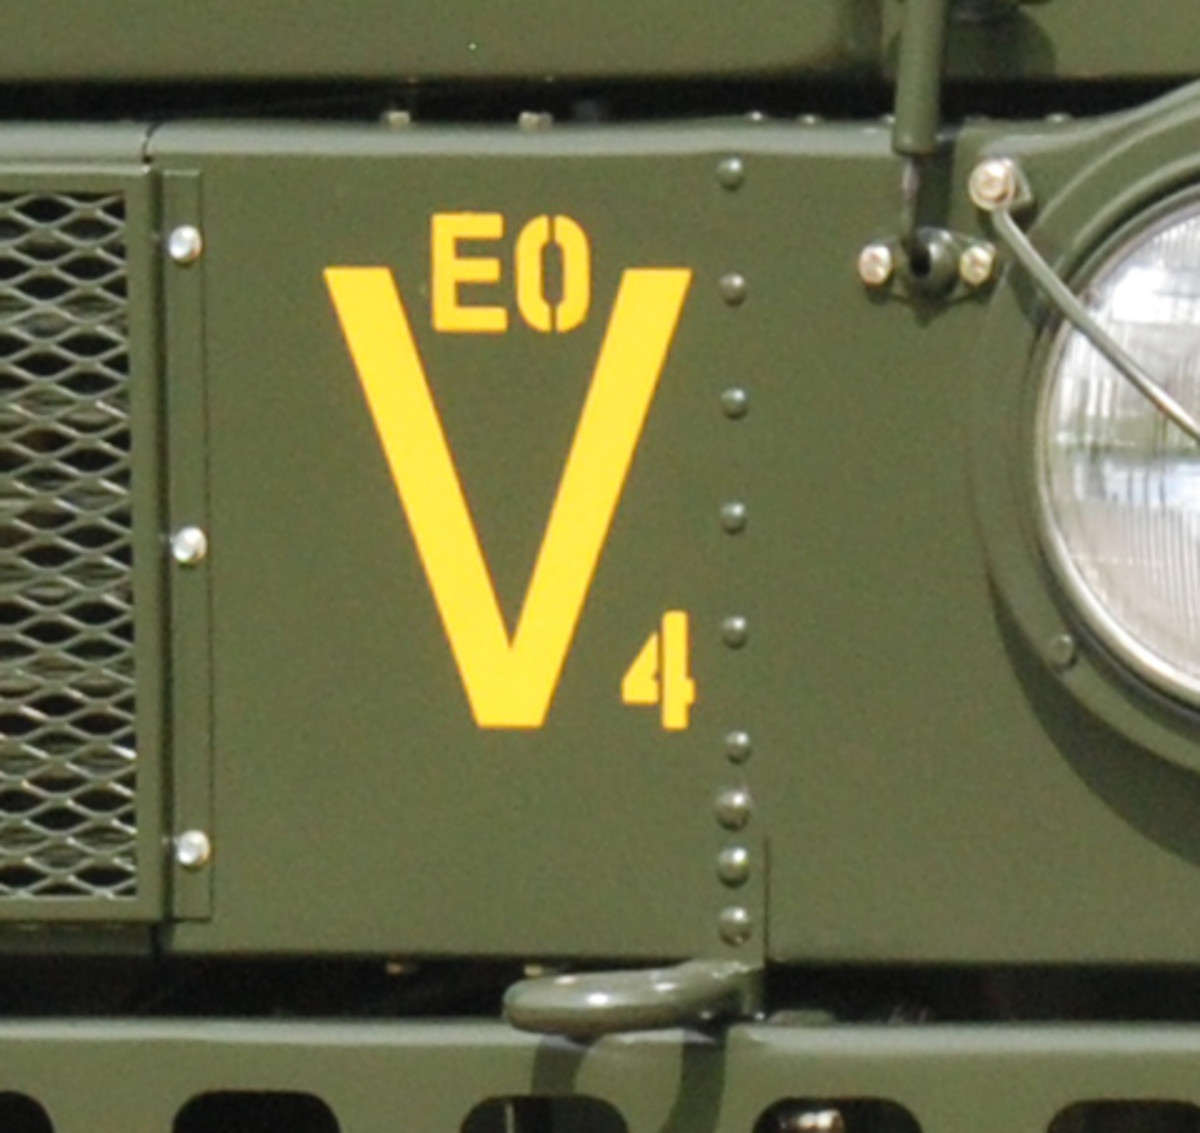 During the restoration, Paul uncovered this set of markings on the front of the truck. He hasn’t been able to to confirm its meaning. Does anyone know what the “EO” inside a “V/4” indicates?